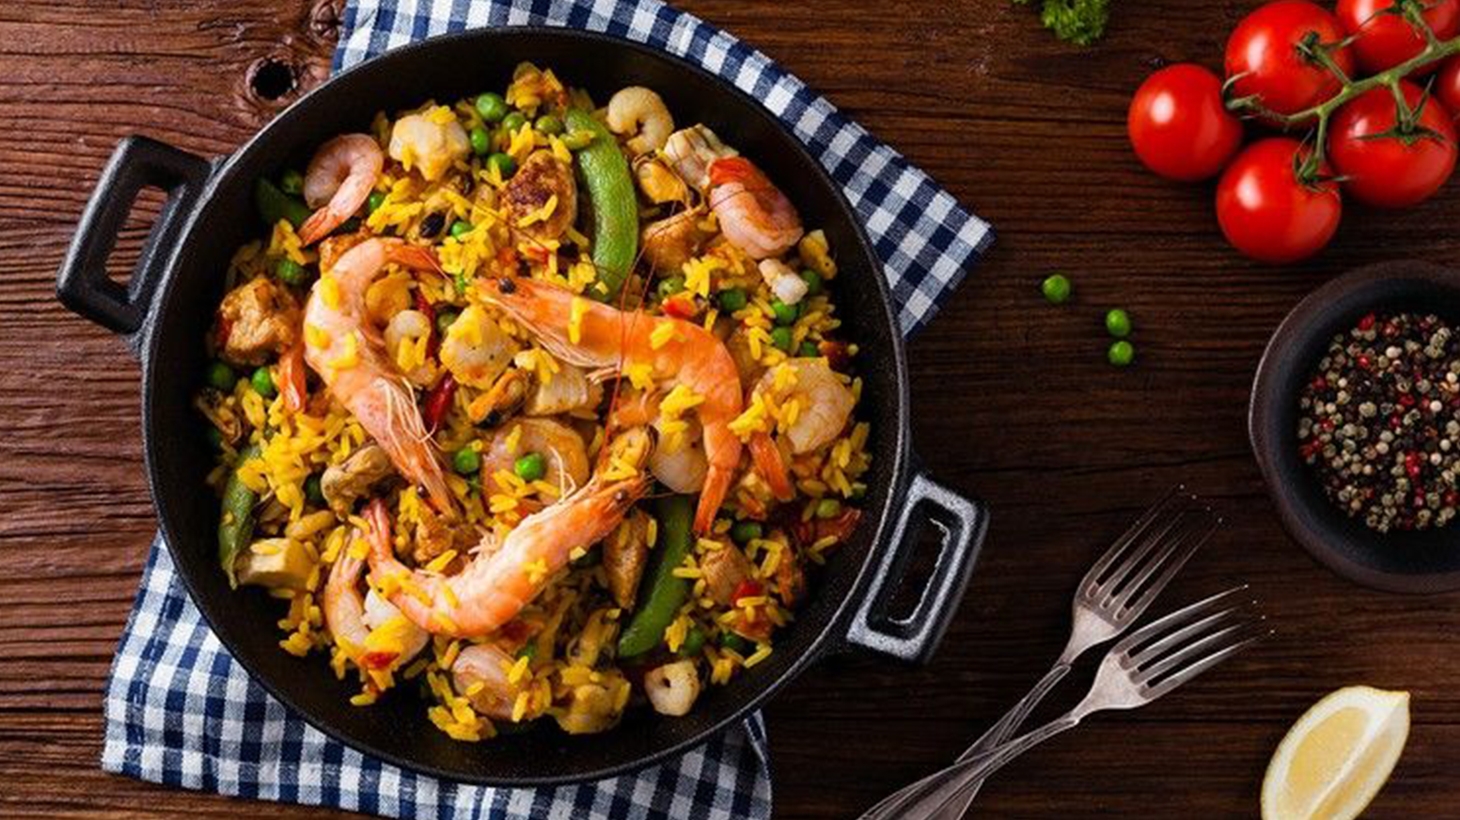 Spanish Paella Cooking Class with Drink and Dinner in Bardon from Pata